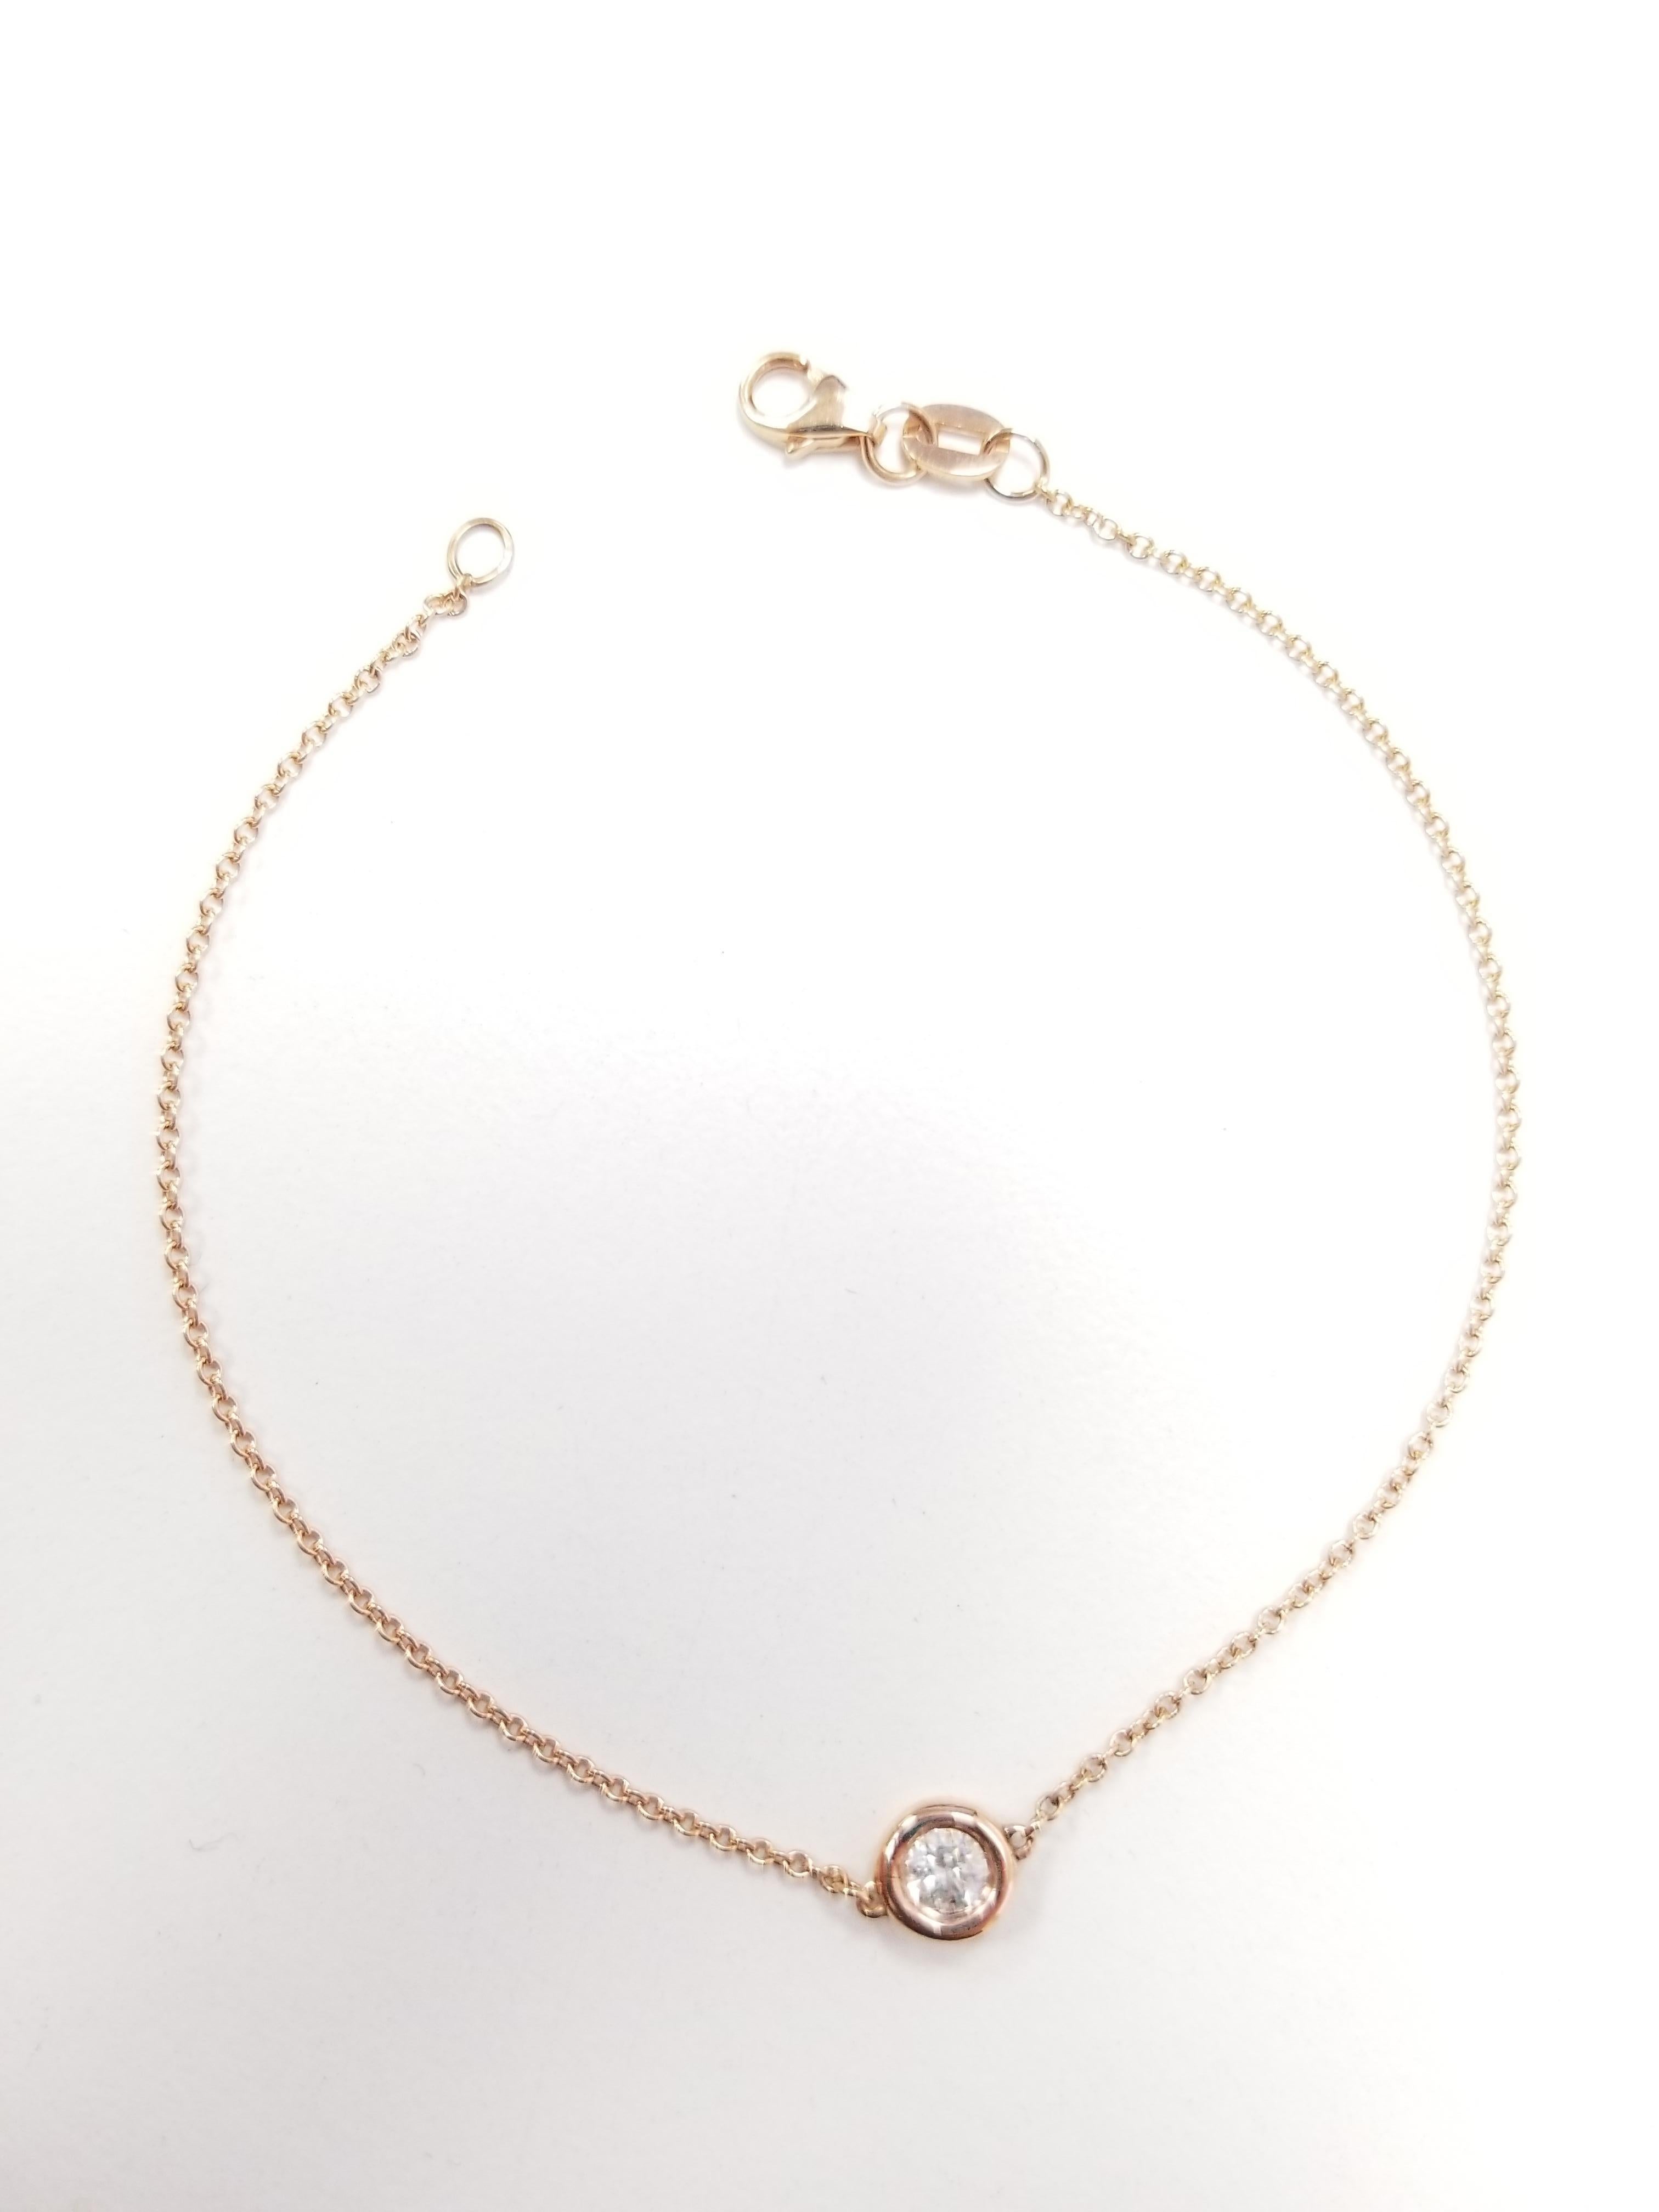 A stunning and classic bracelet perfect for everyday wear combined or simply on it's own. 0.32 ct White Diamond is handset in an 14k bezel and attached to a dainty chain with and clasp from 7 inch.  The bracelet is hand polished with a shiny finish.